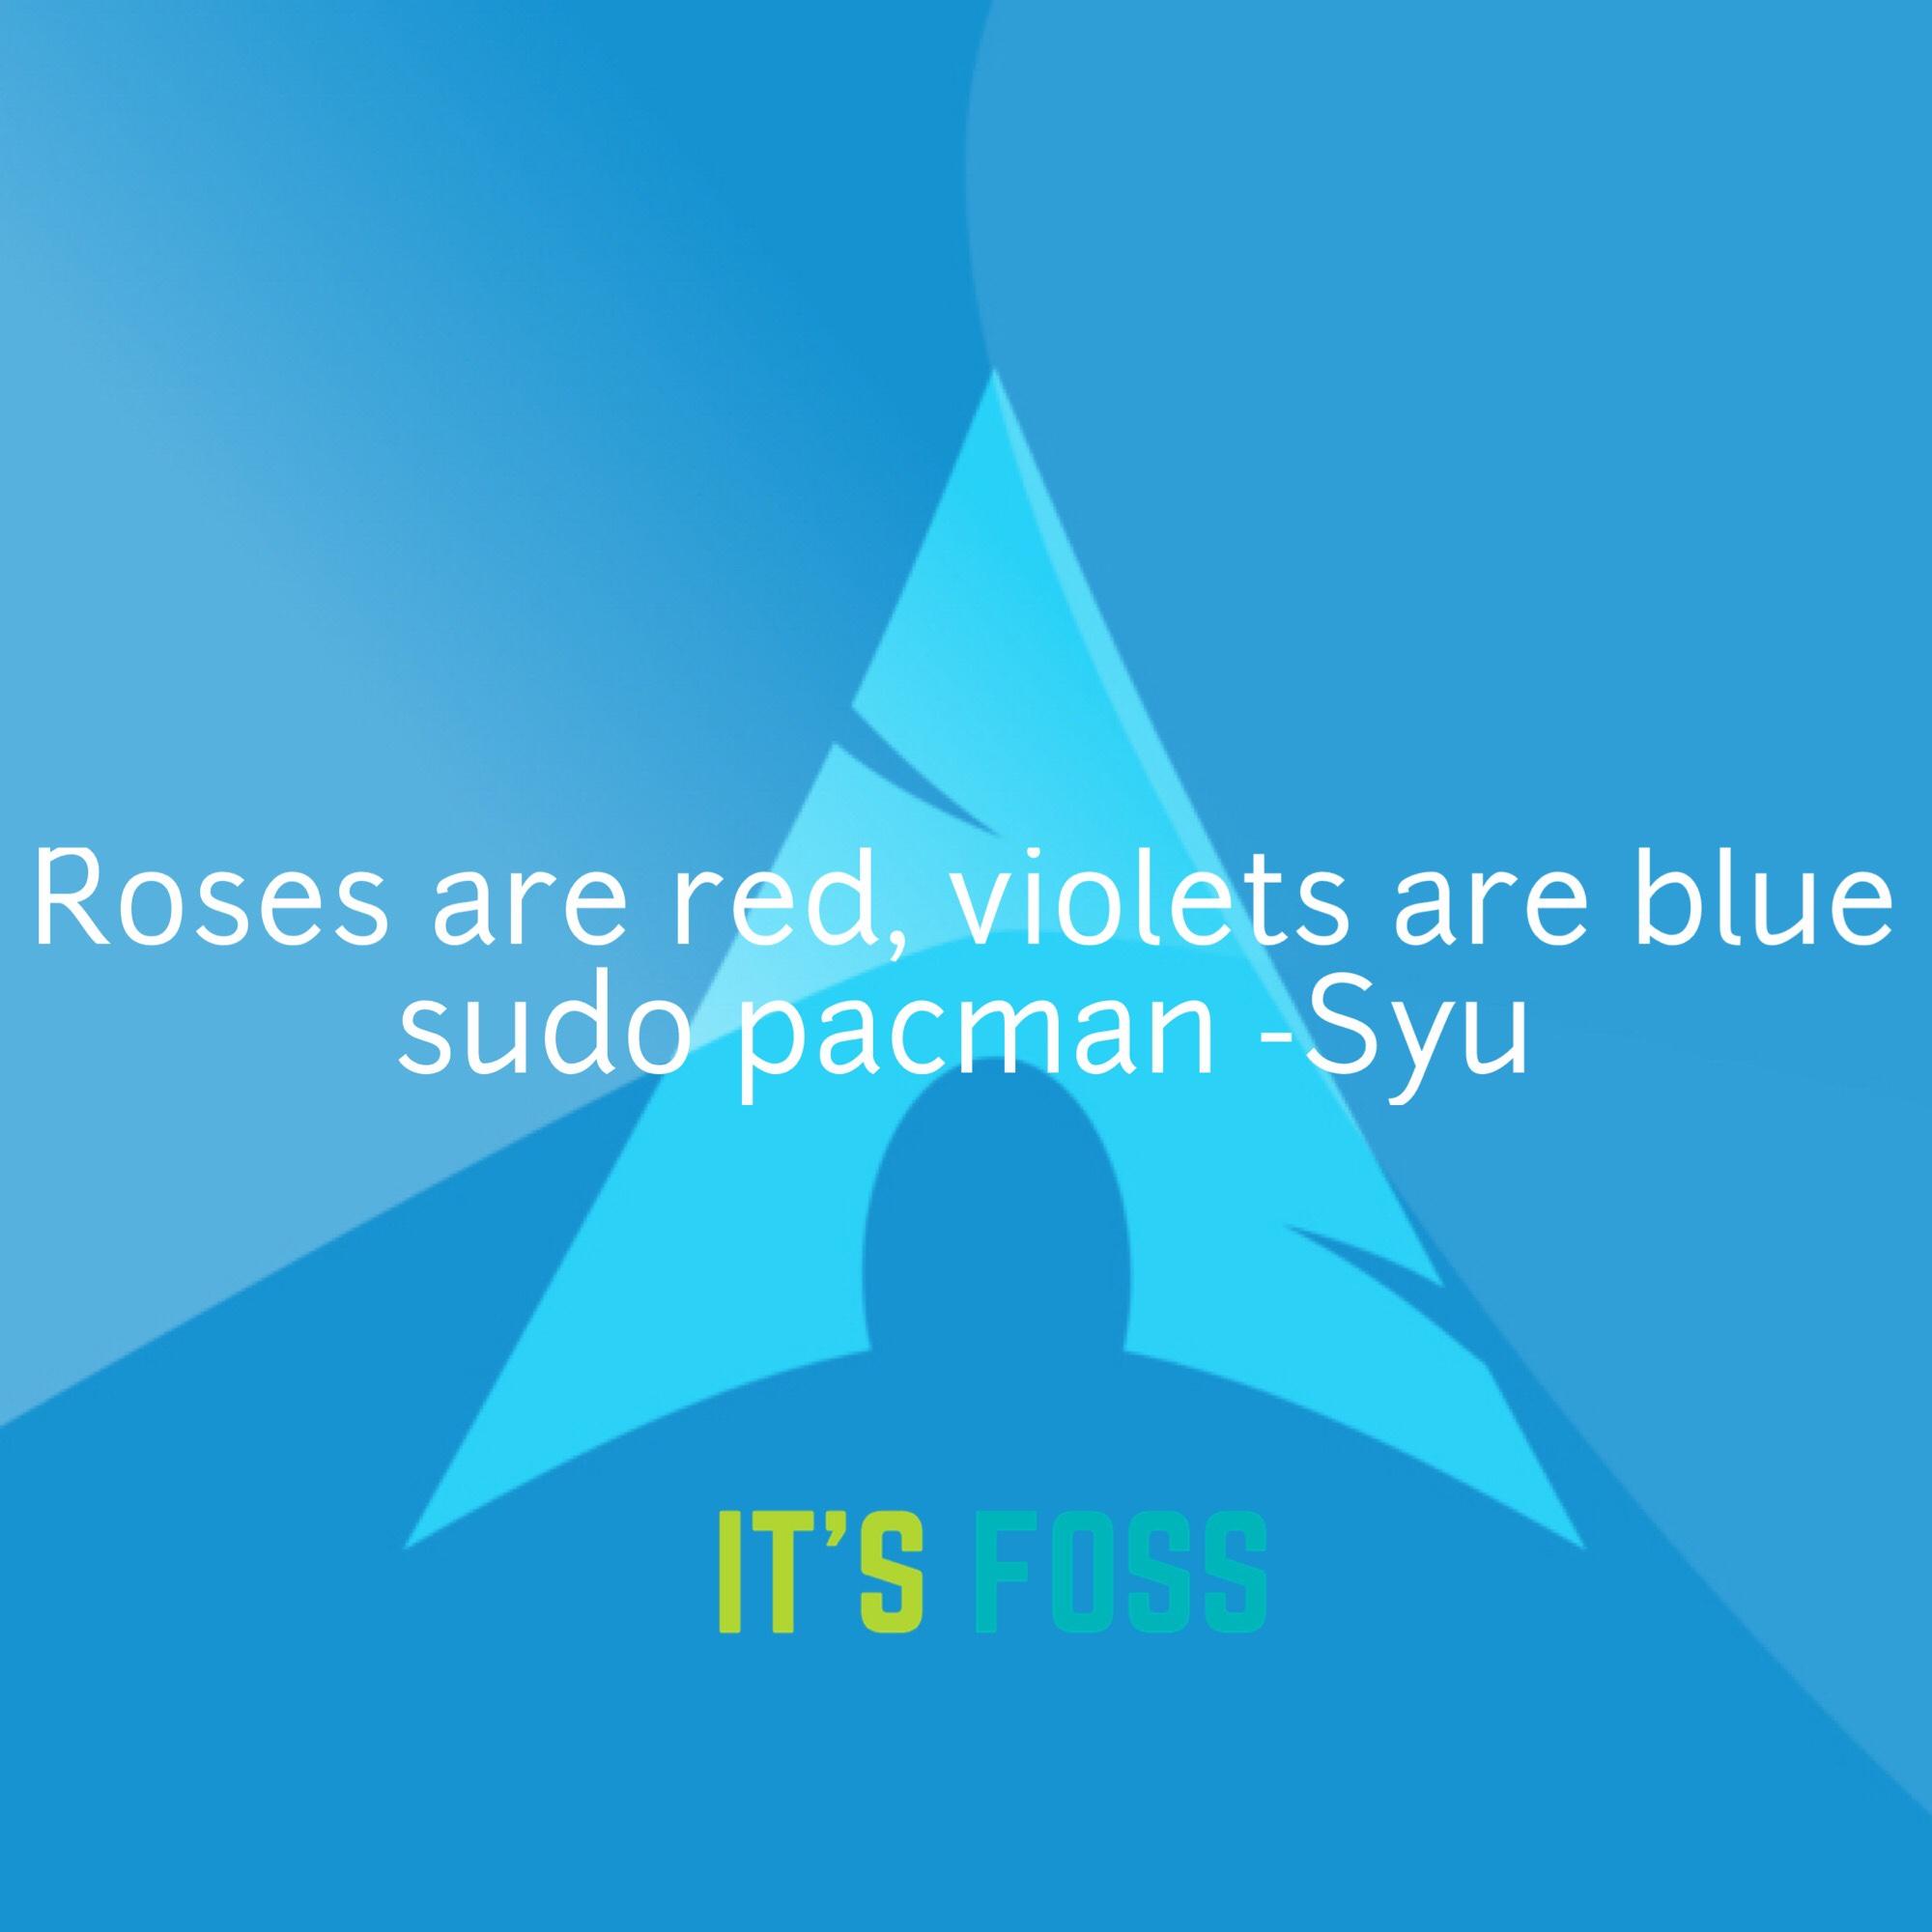 Blue Violets Logo - Roses are red, violets are blue, sudo pacman -Syu :-) : linuxmemes